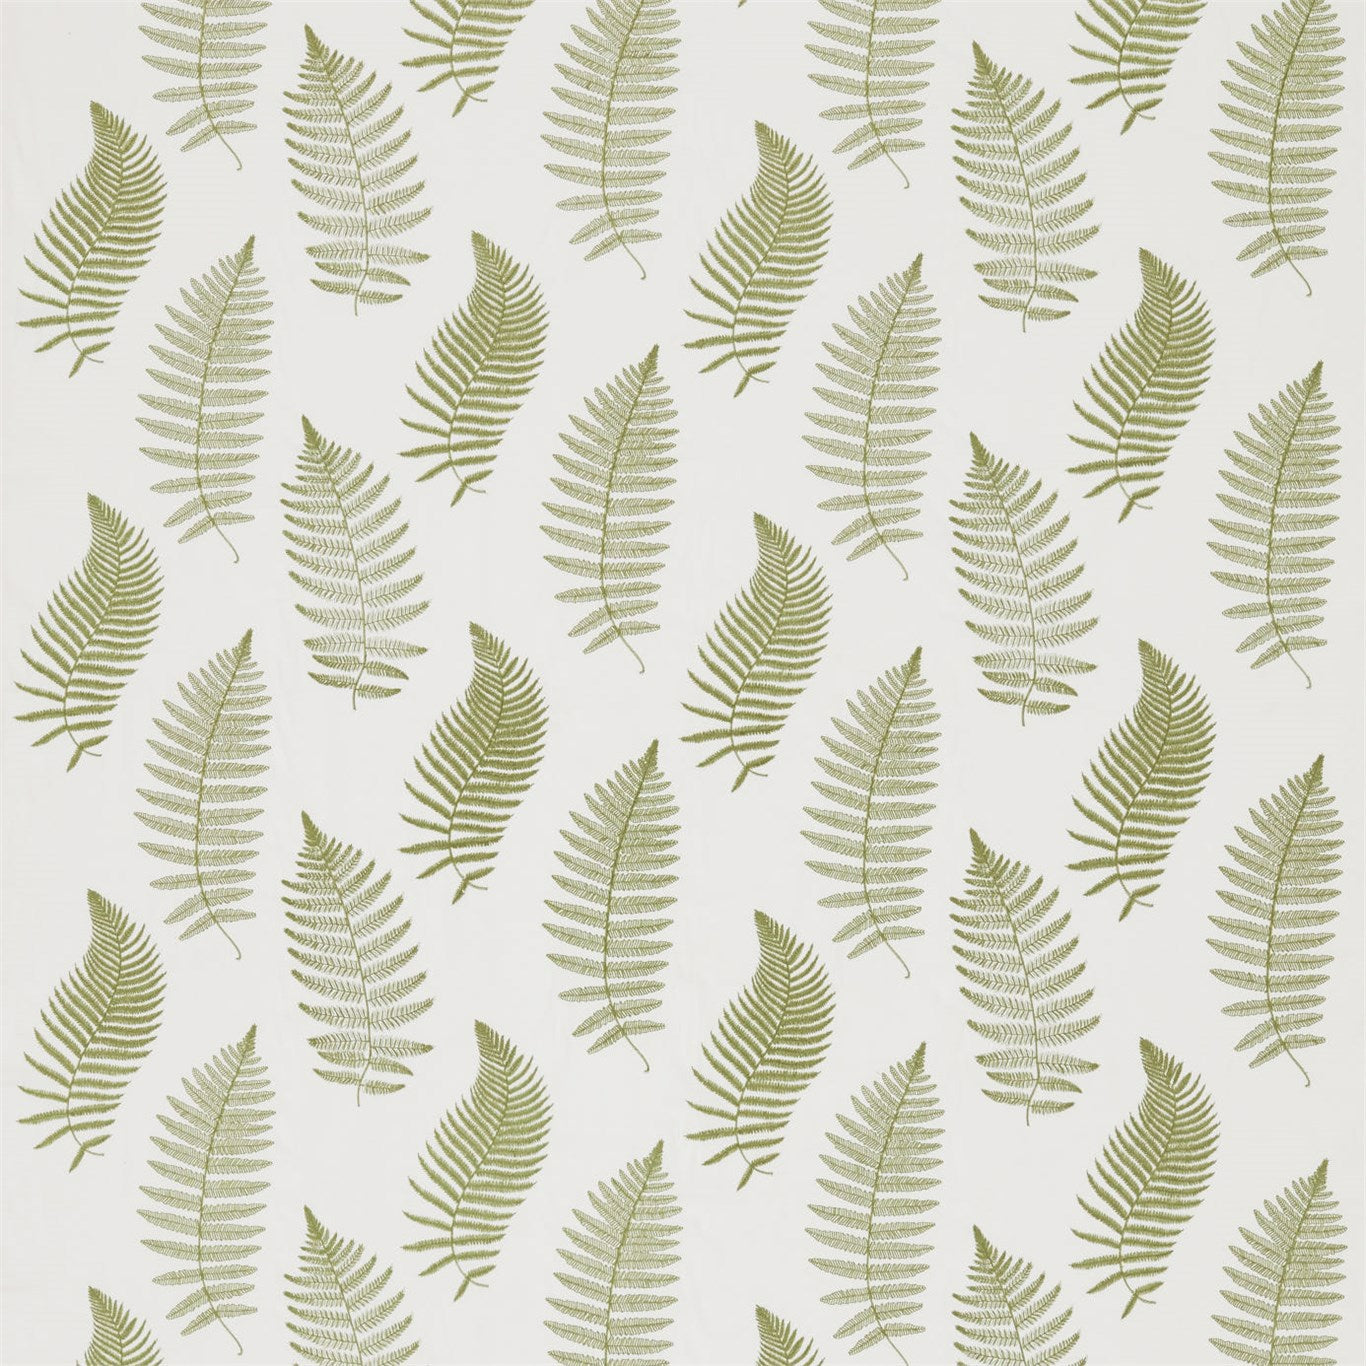 Fern Embroidery Moss Fabric By Sanderson